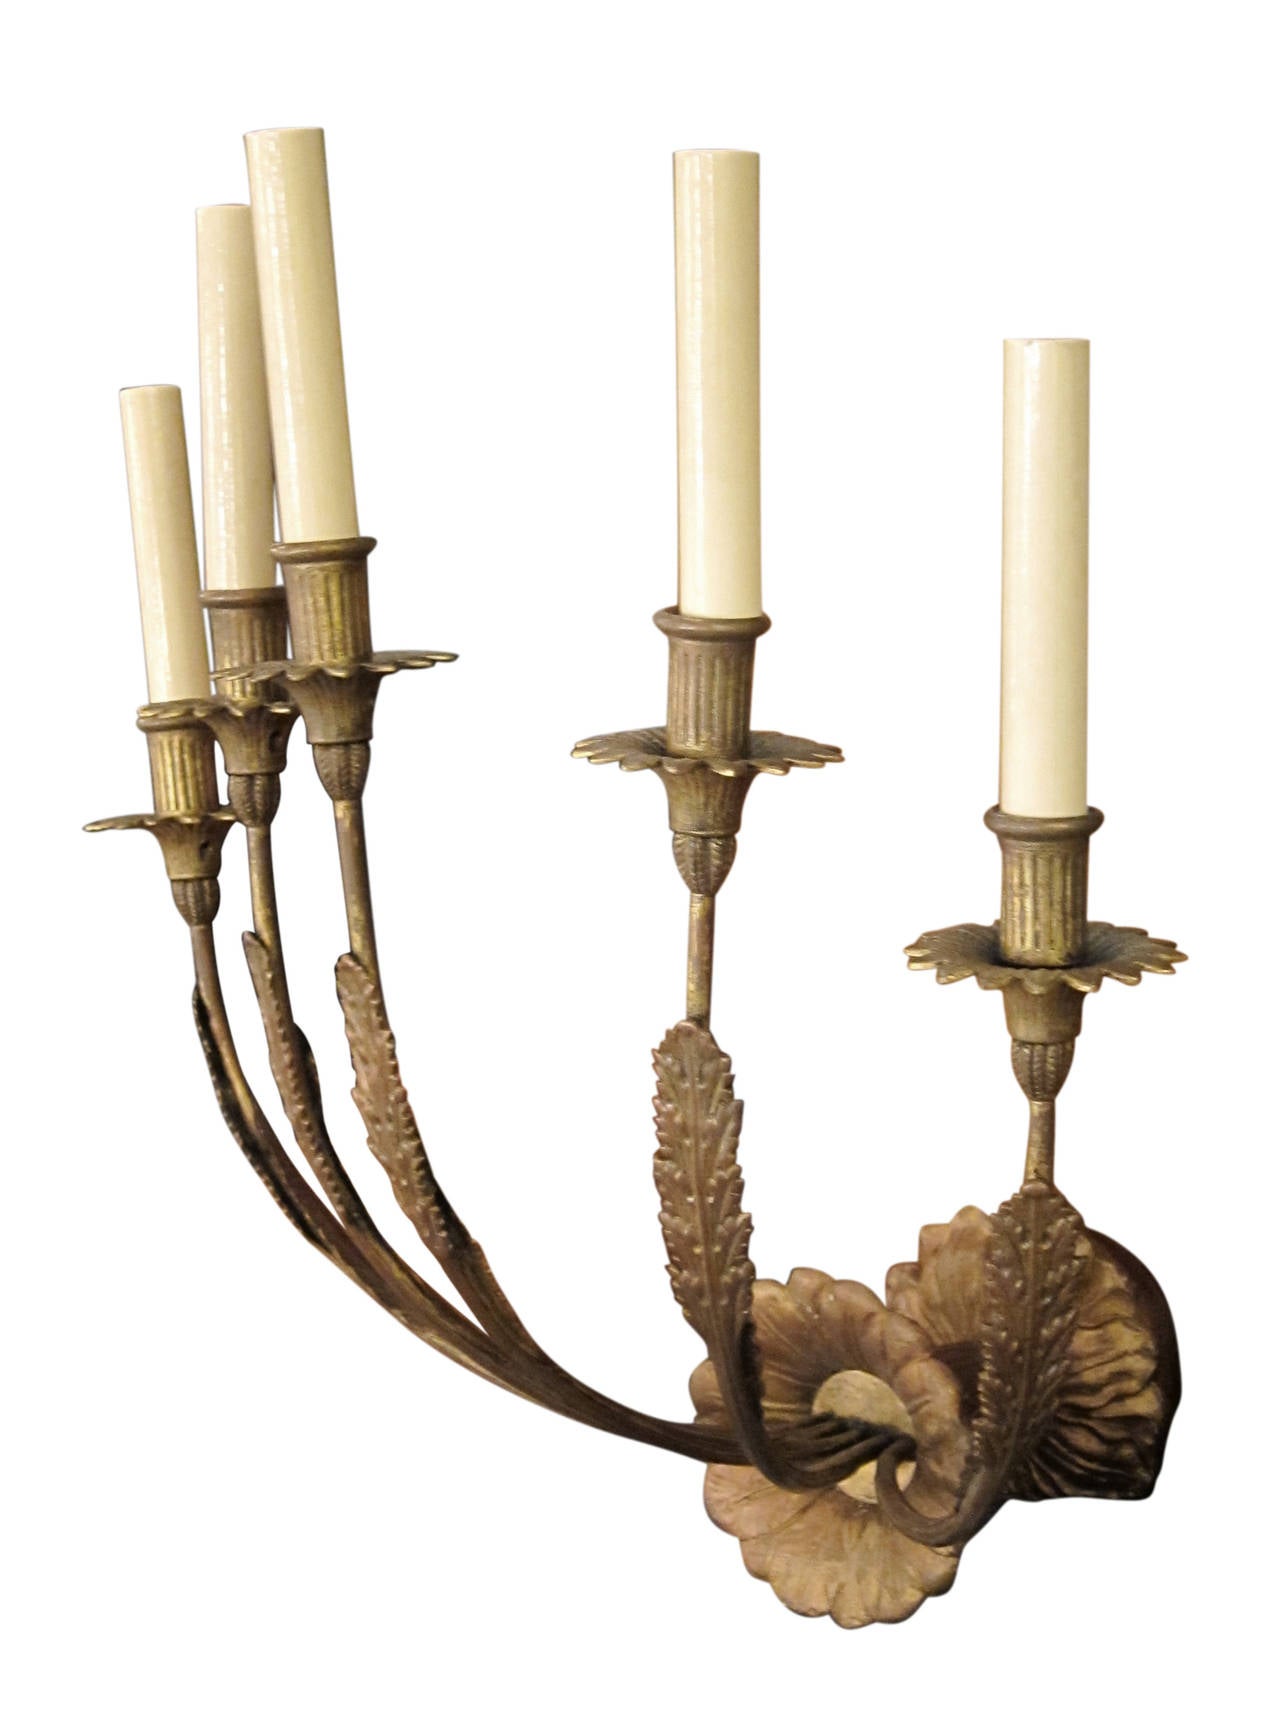 1890s Pair of Five-Light Victorian Sconces with Gesso Leaves 2